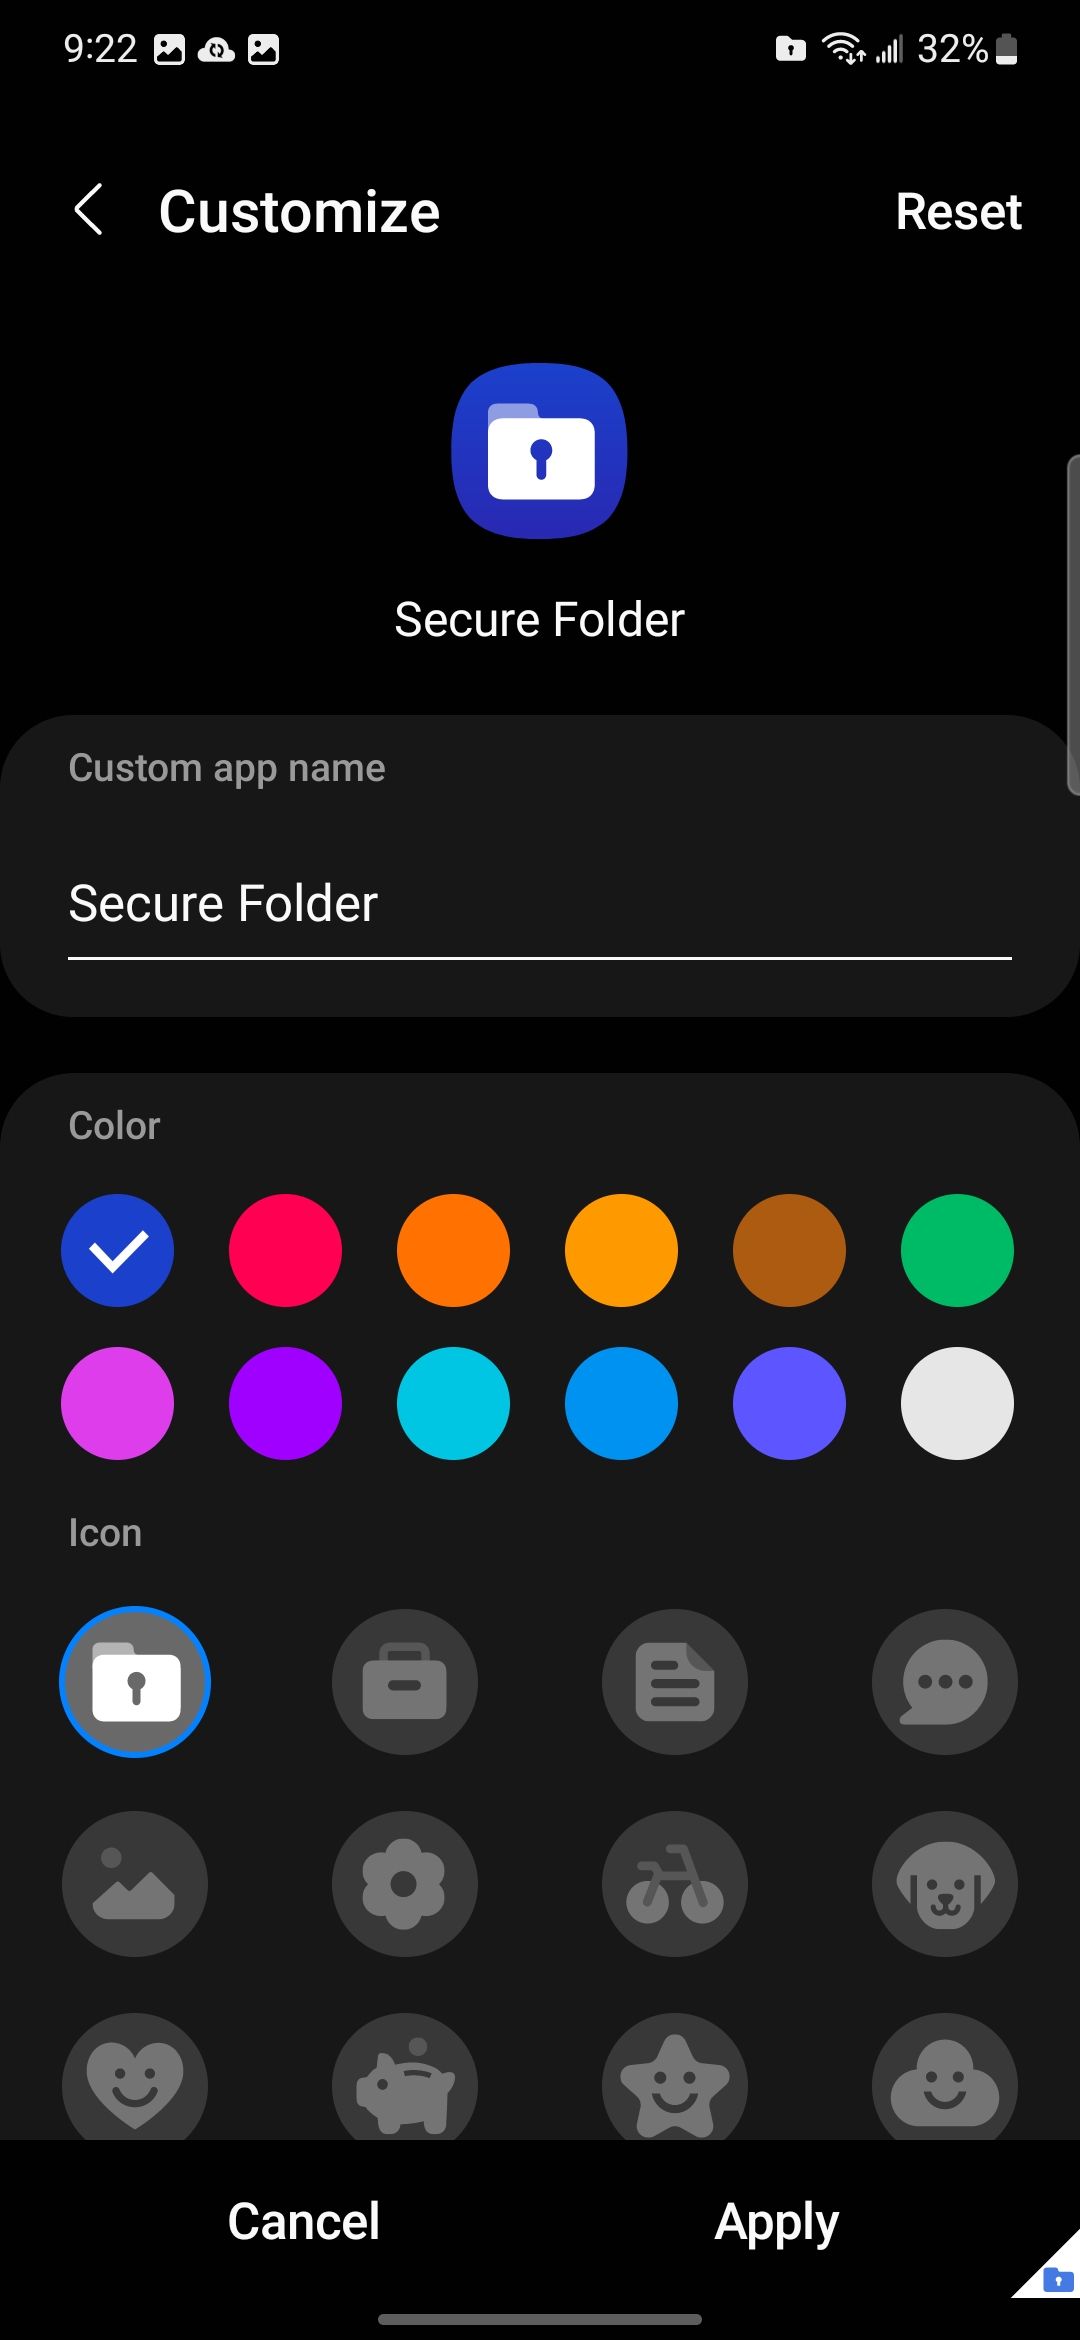 The customize settings for Secure Folder